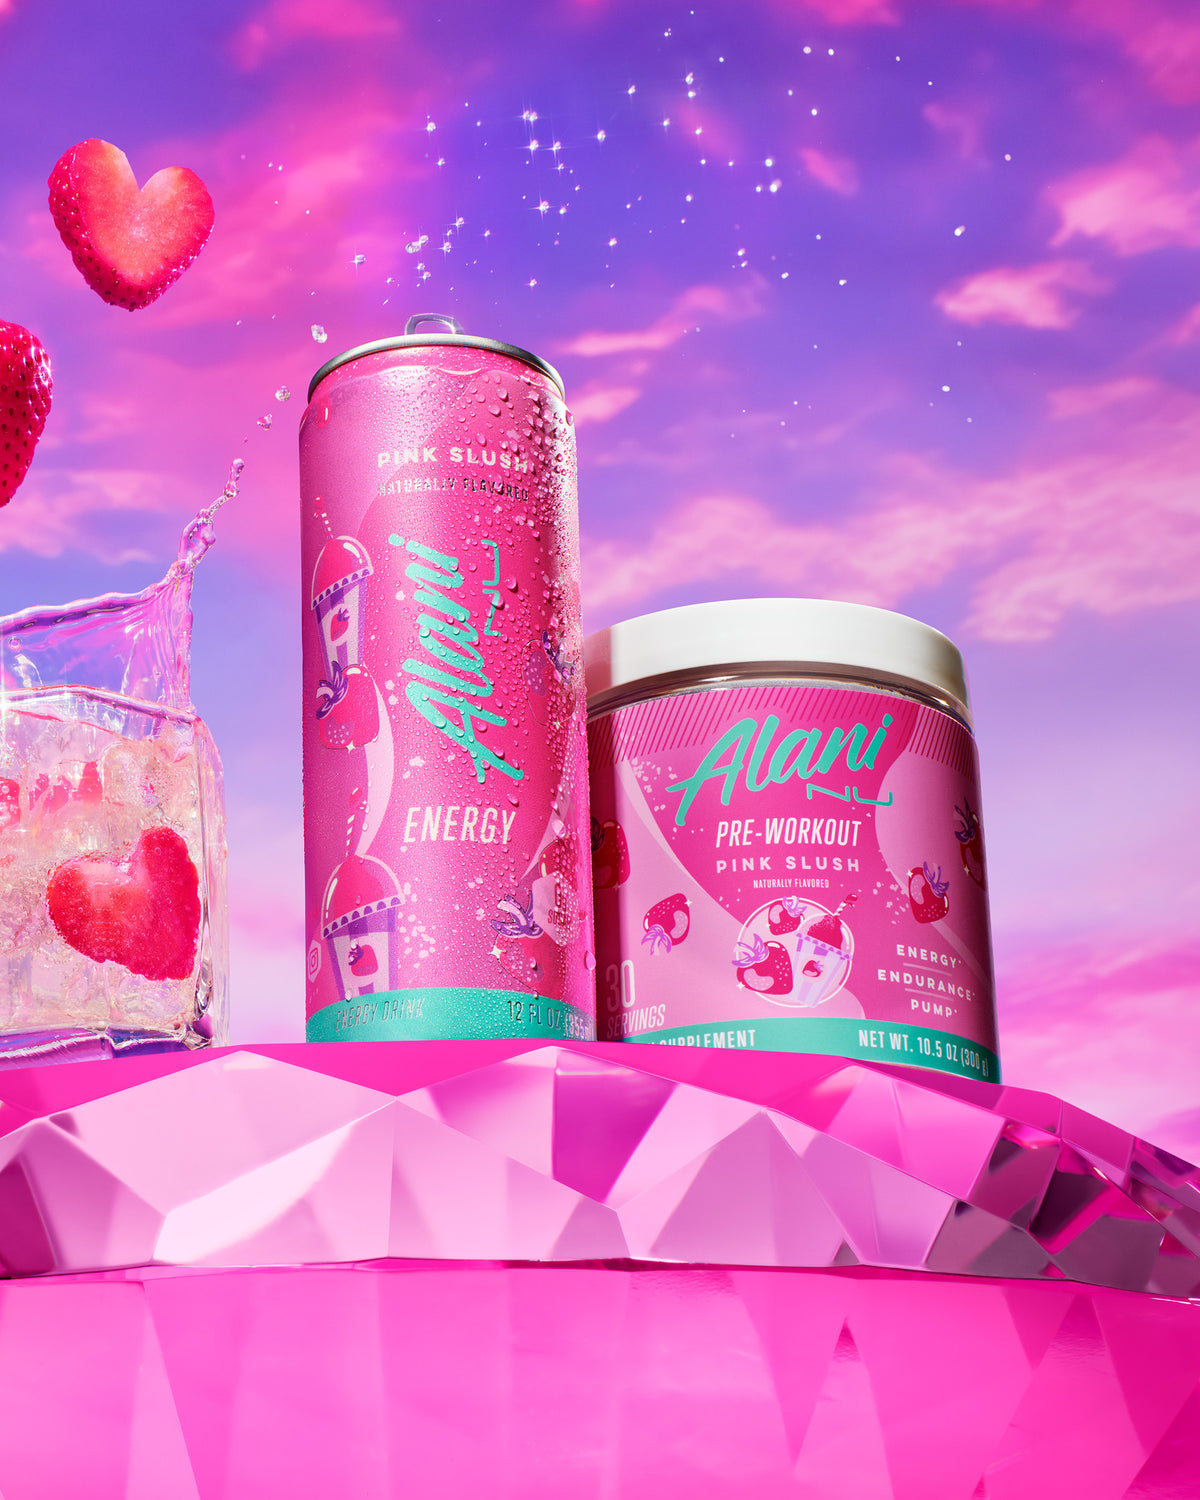 Pink Slush Energy and Pre-Workout side-by-side on a pink-diamond table next to a clear rocks glass with liquid and heart-shaped strawberries splashing upward.  